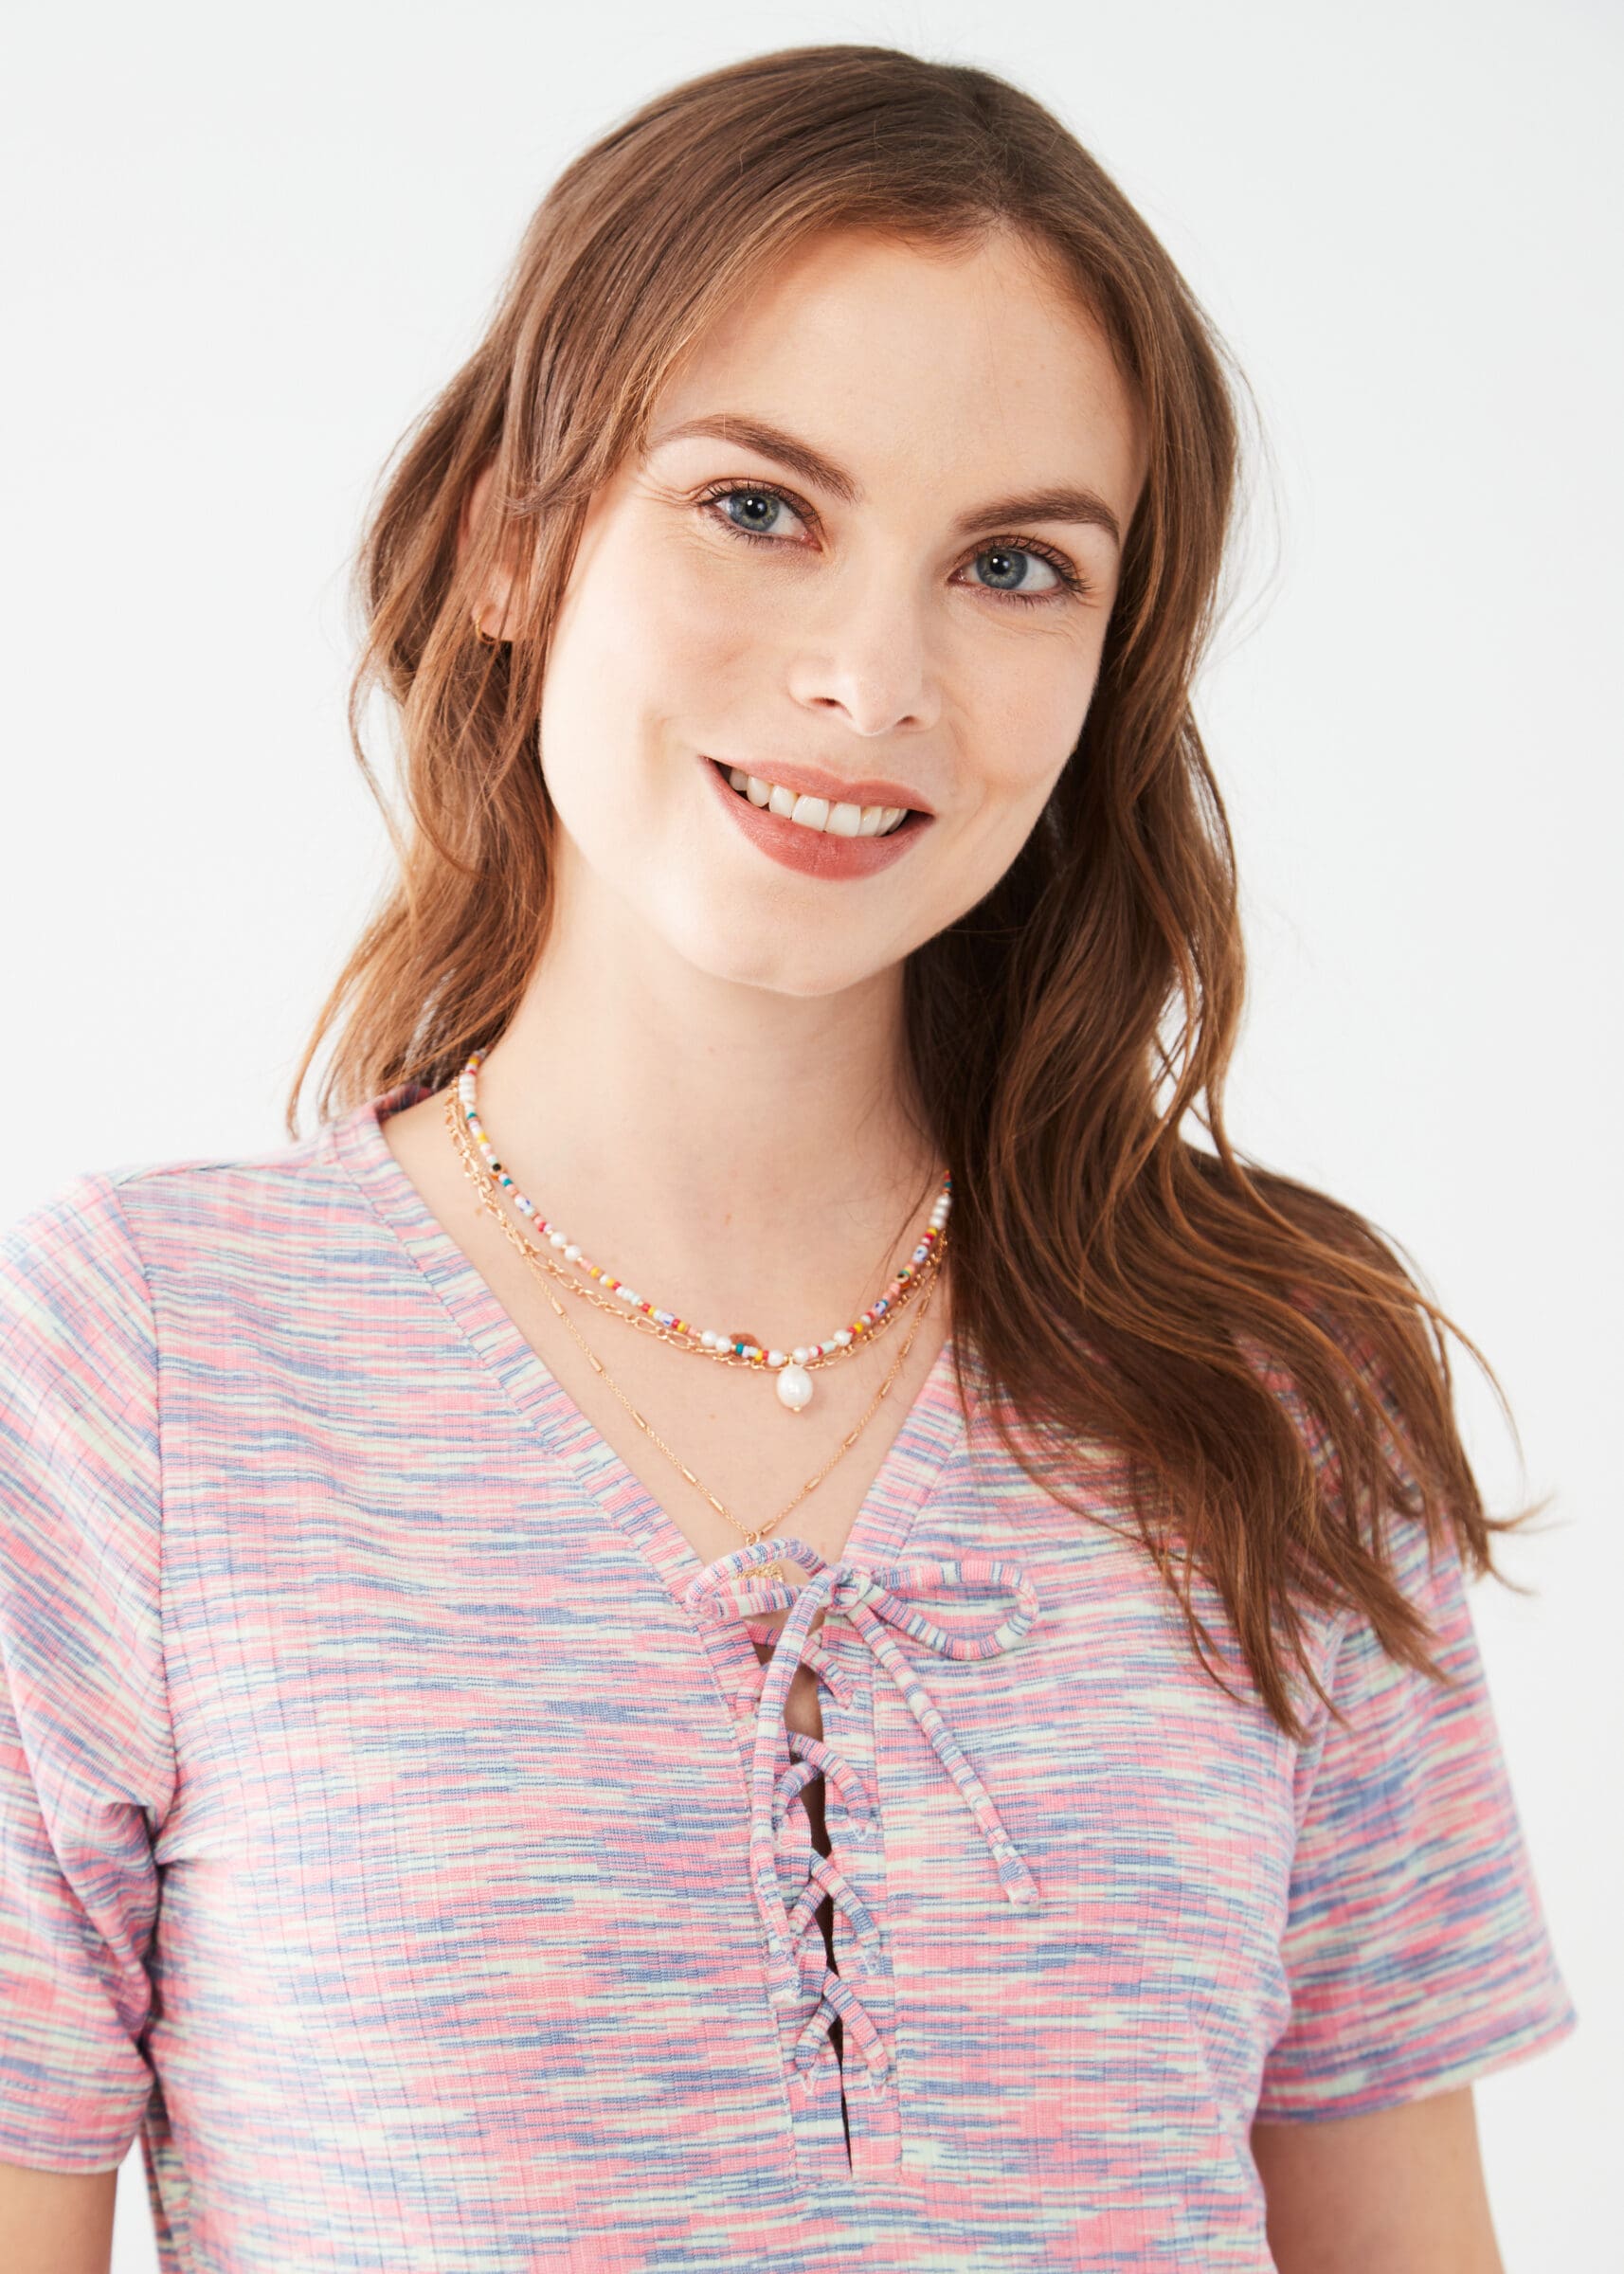 Looking for a standout knit top? We've got you covered with our FDJ Elbow Sleeve Lace Up Knit Top. Featuring a playful lace up front and elbow length sleeves, this top adds a touch of fun to any outfit. Get ready to turn heads with this unique and stylish piece.